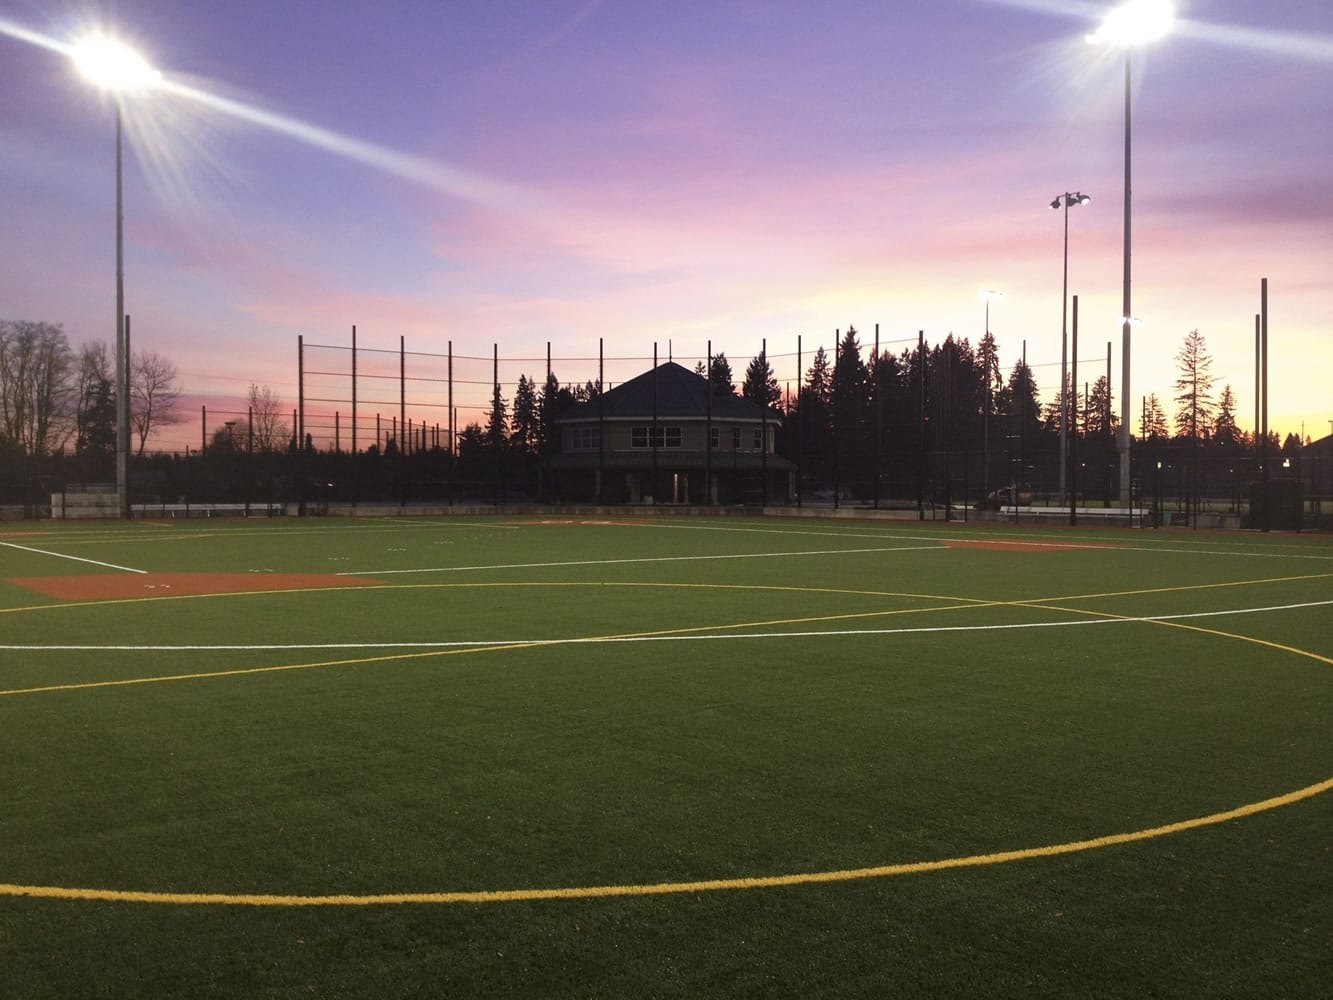 The largest field at the Luke Jensen Sports Park in Hazel Dell has synthetic turf and can be used for several different sports including baseball, soccer and lacrosse.